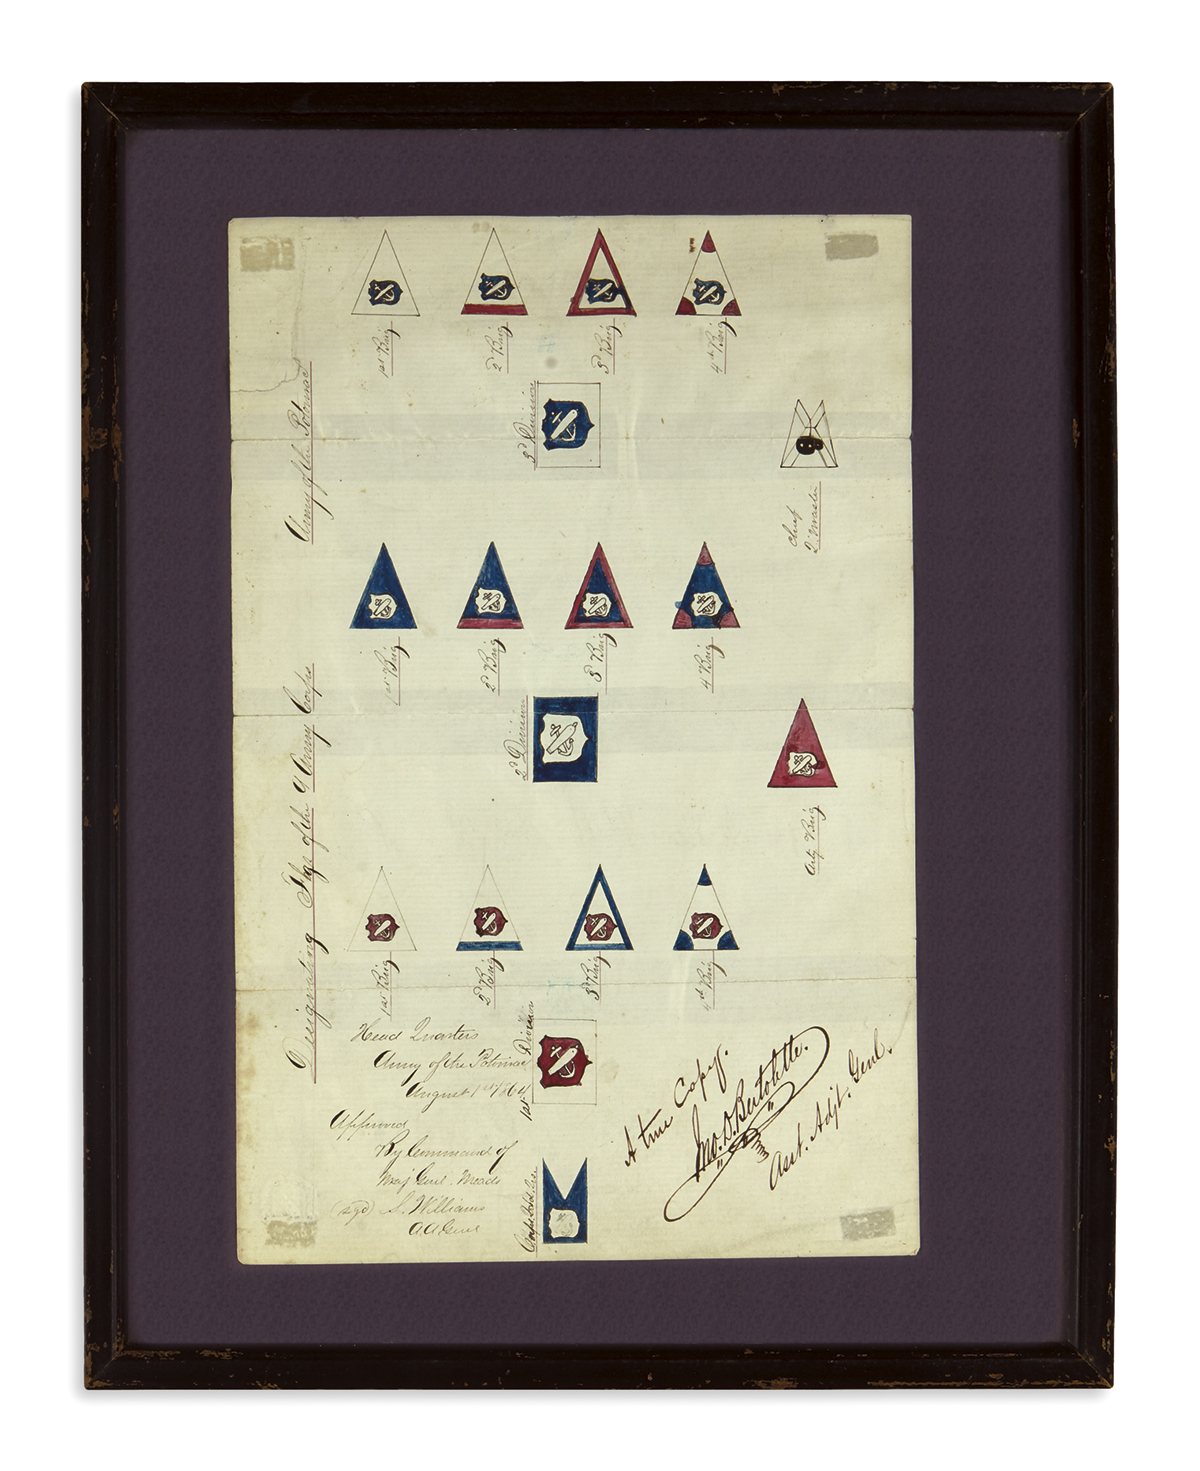 (CIVIL WAR.) Bertolette, John D. Designating Flags of the 9 Army Corps, Army of the Potomac.